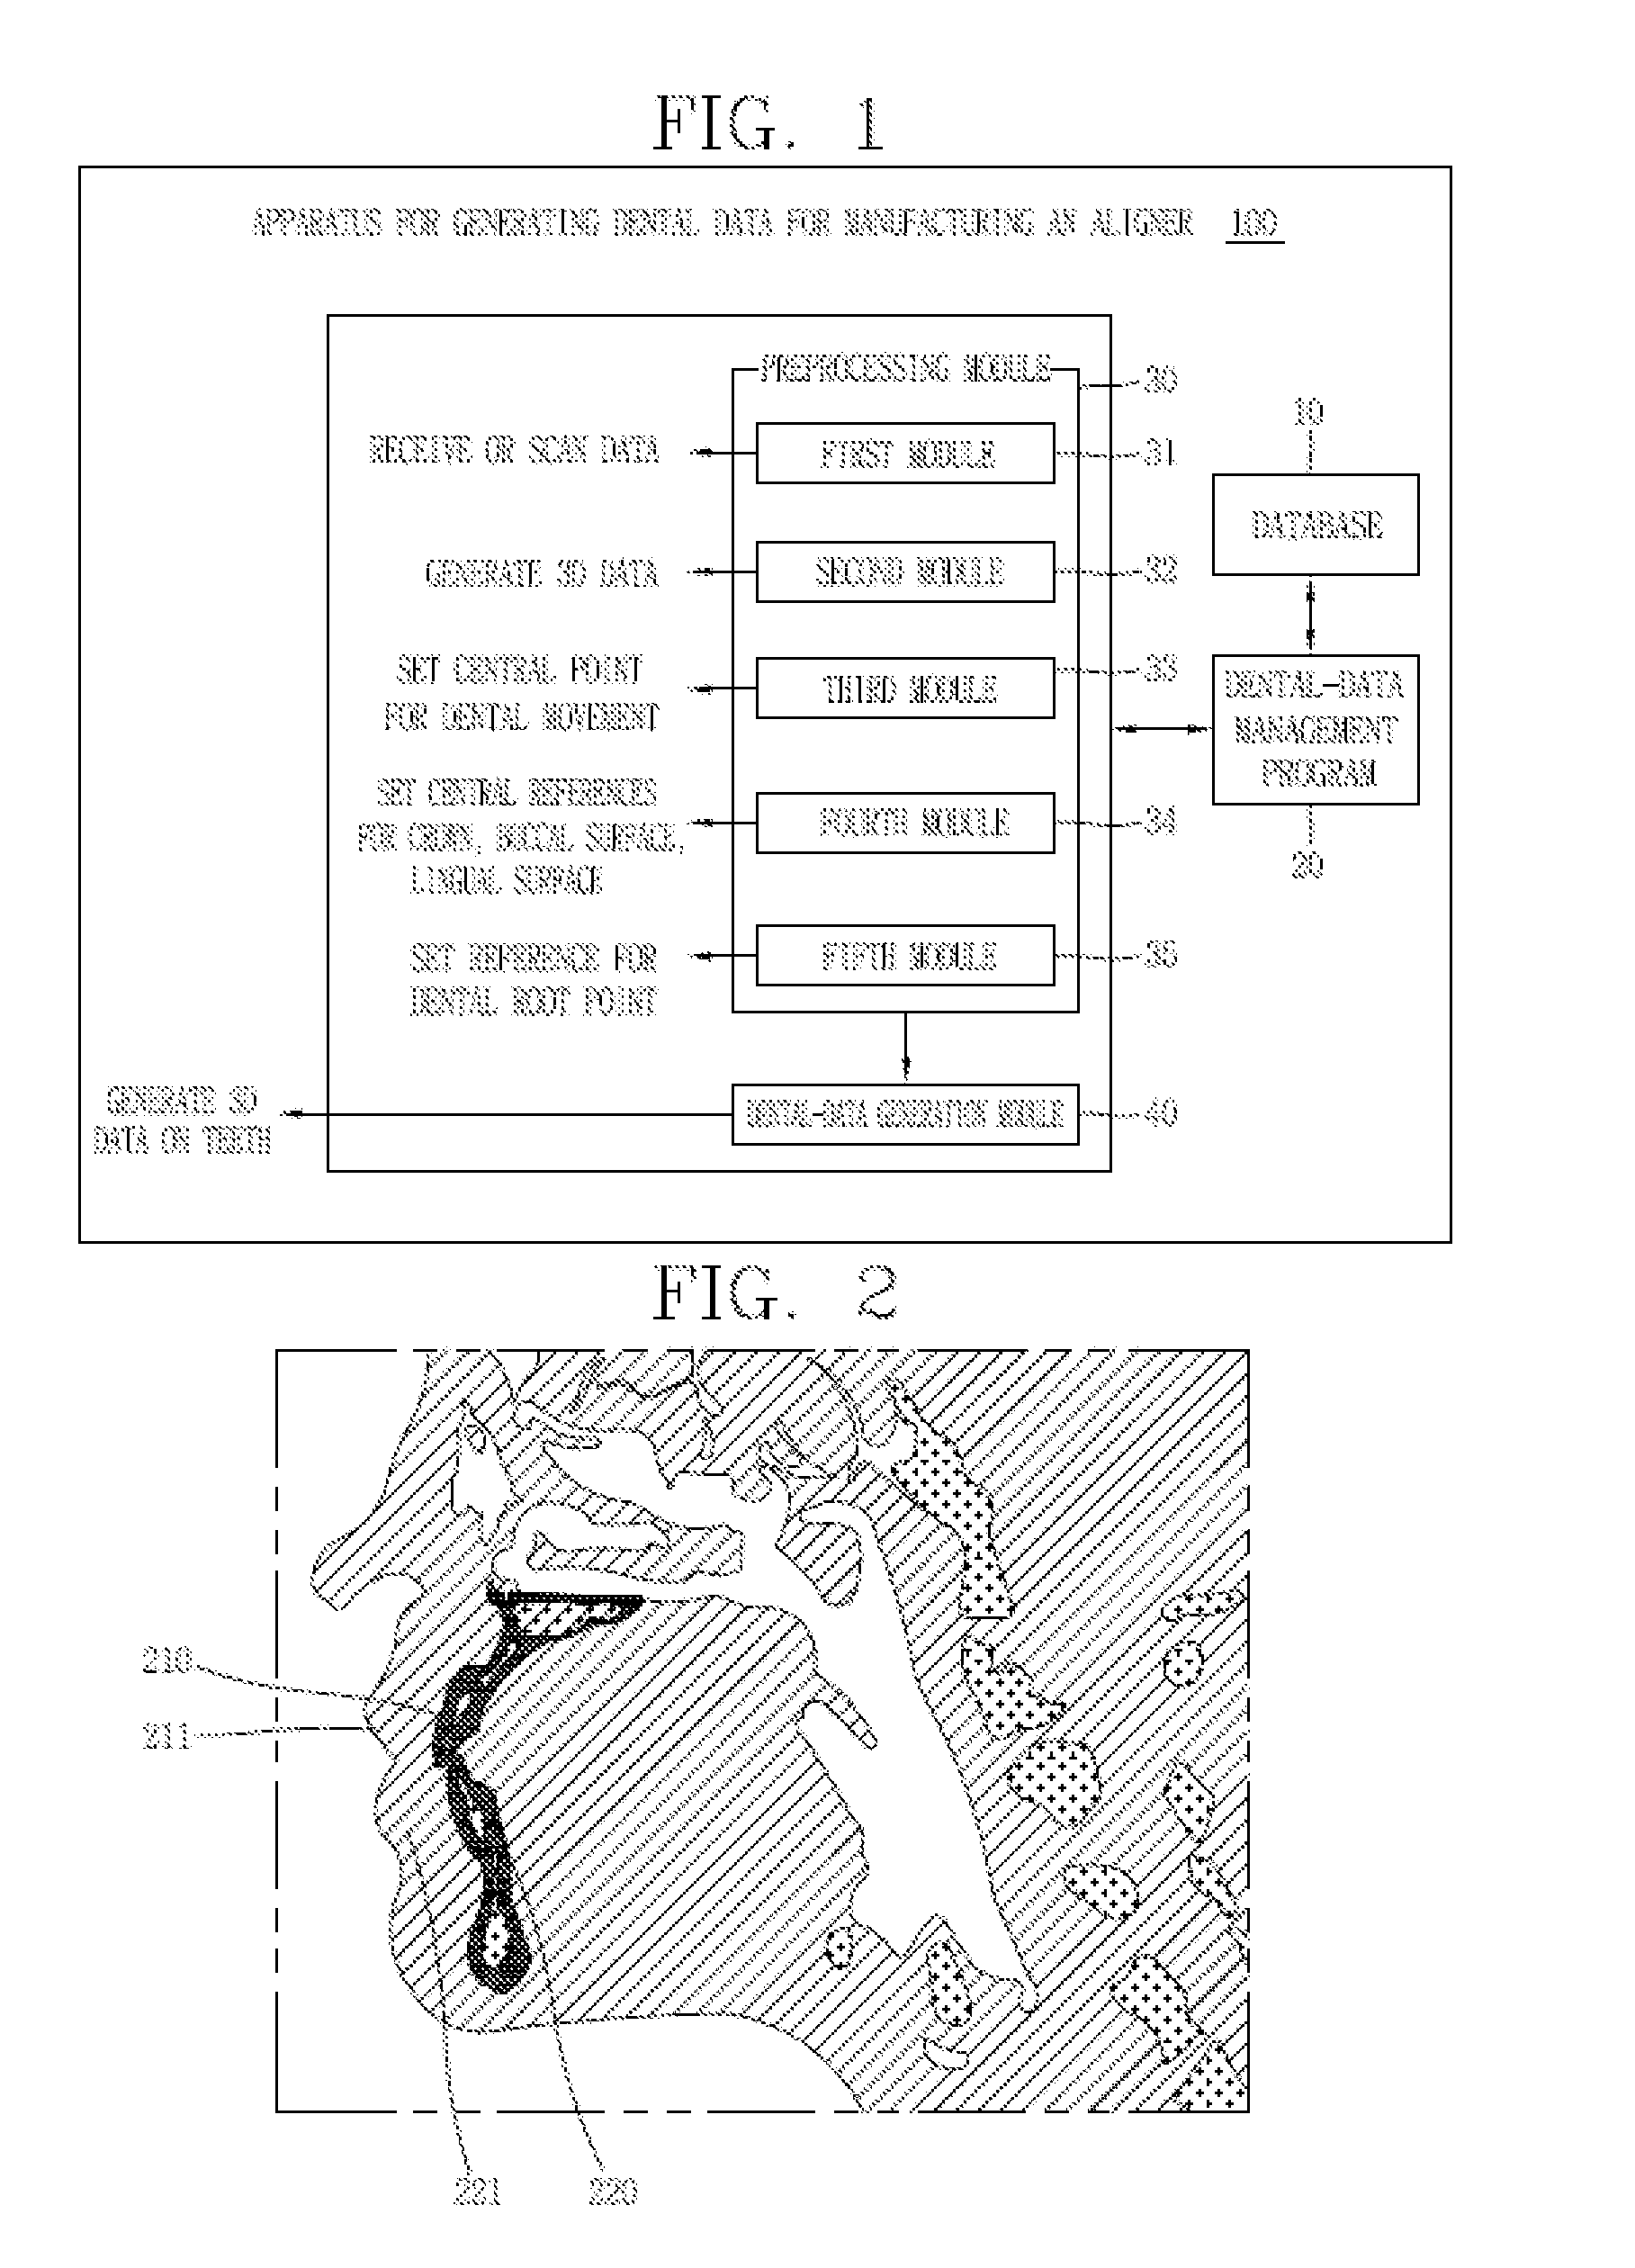 Apparatus for generating dental data for manufacturing an aligner and method of manufacturing clear aligner using the apparatus